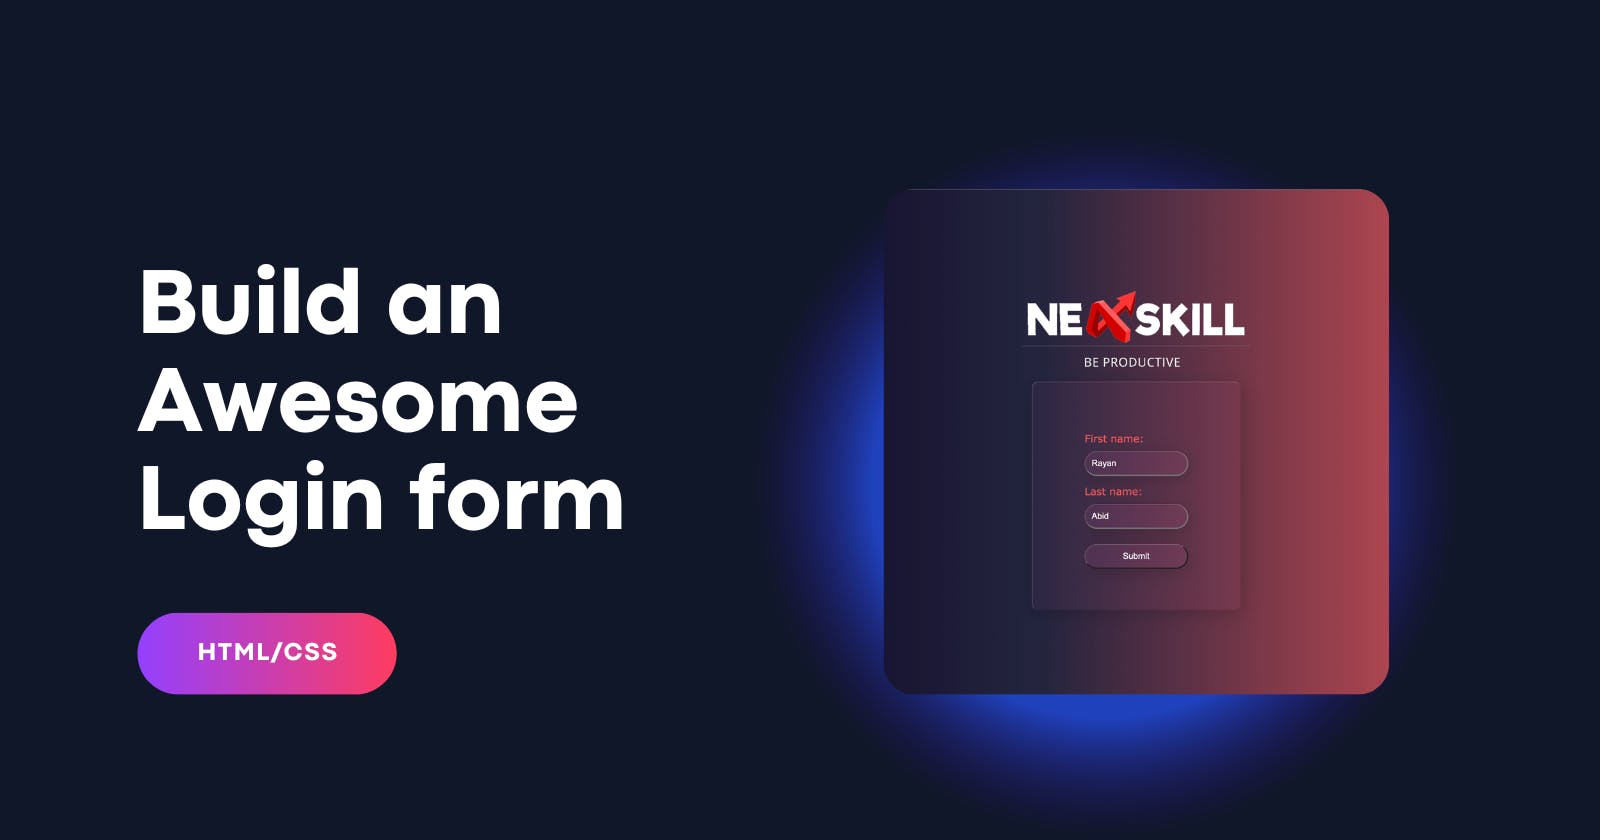 Build an awesome login form using HTML/CSS